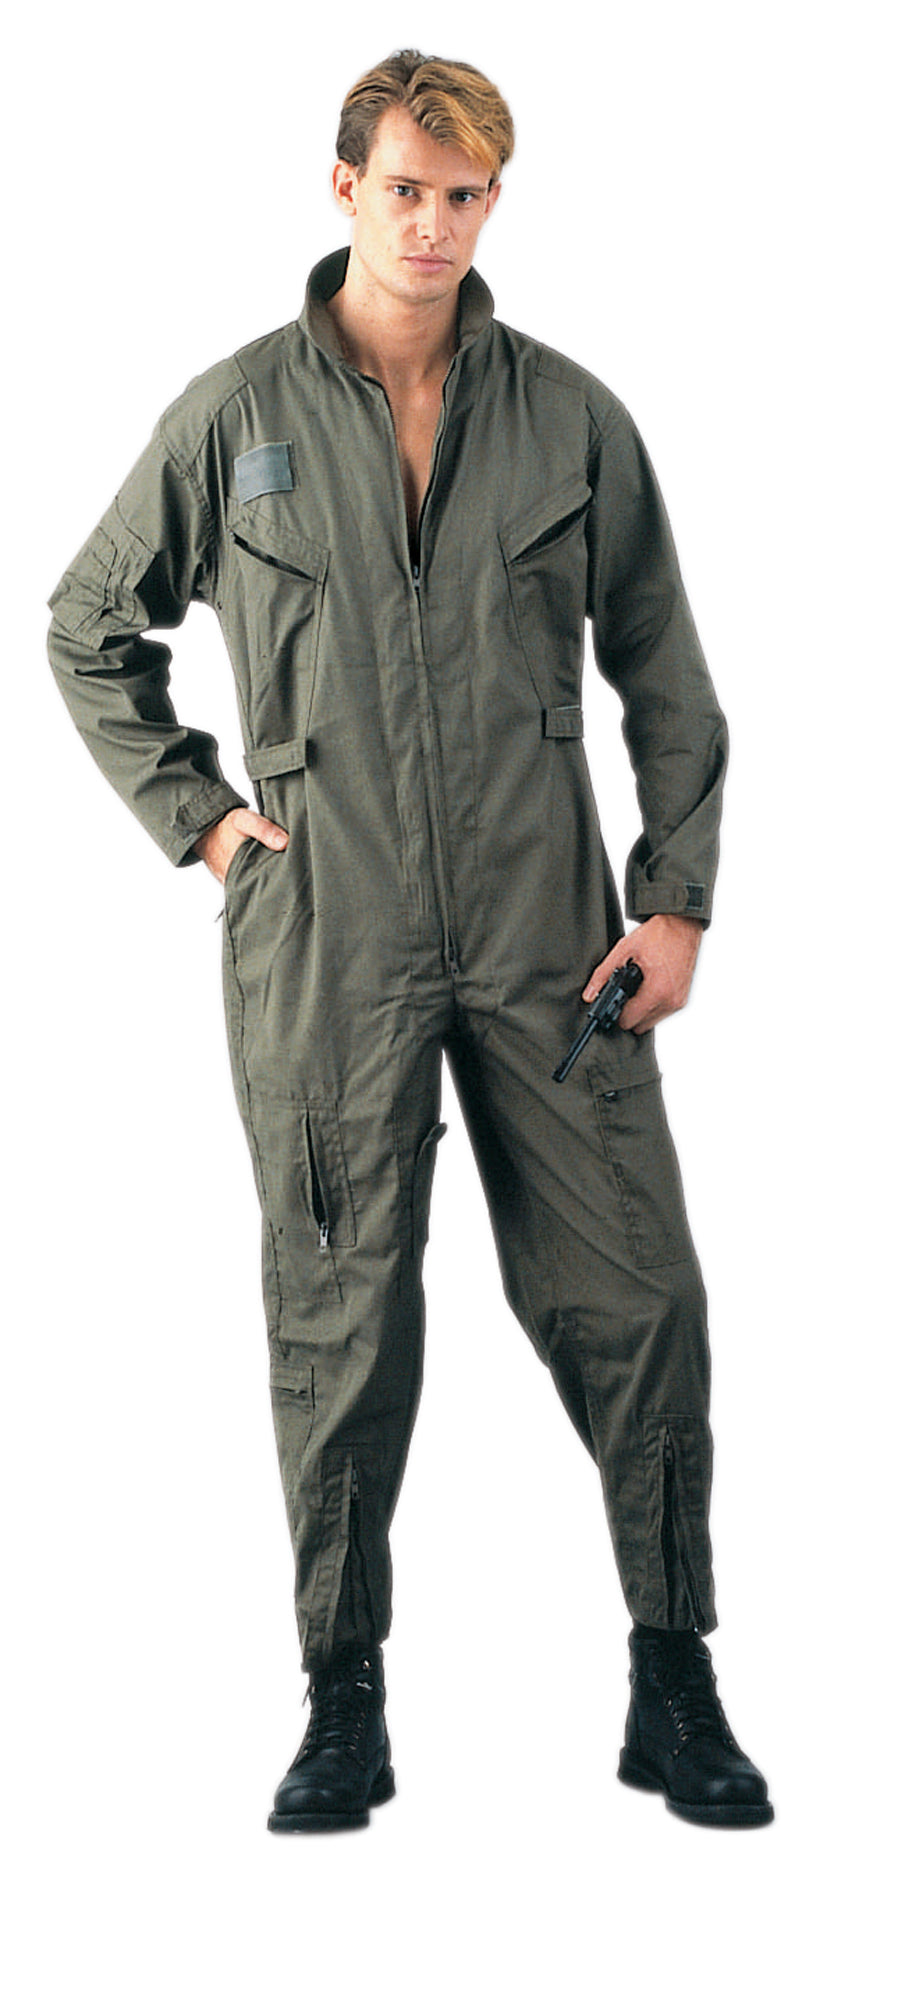 Rothco Flightsuits - Tactical Choice Plus